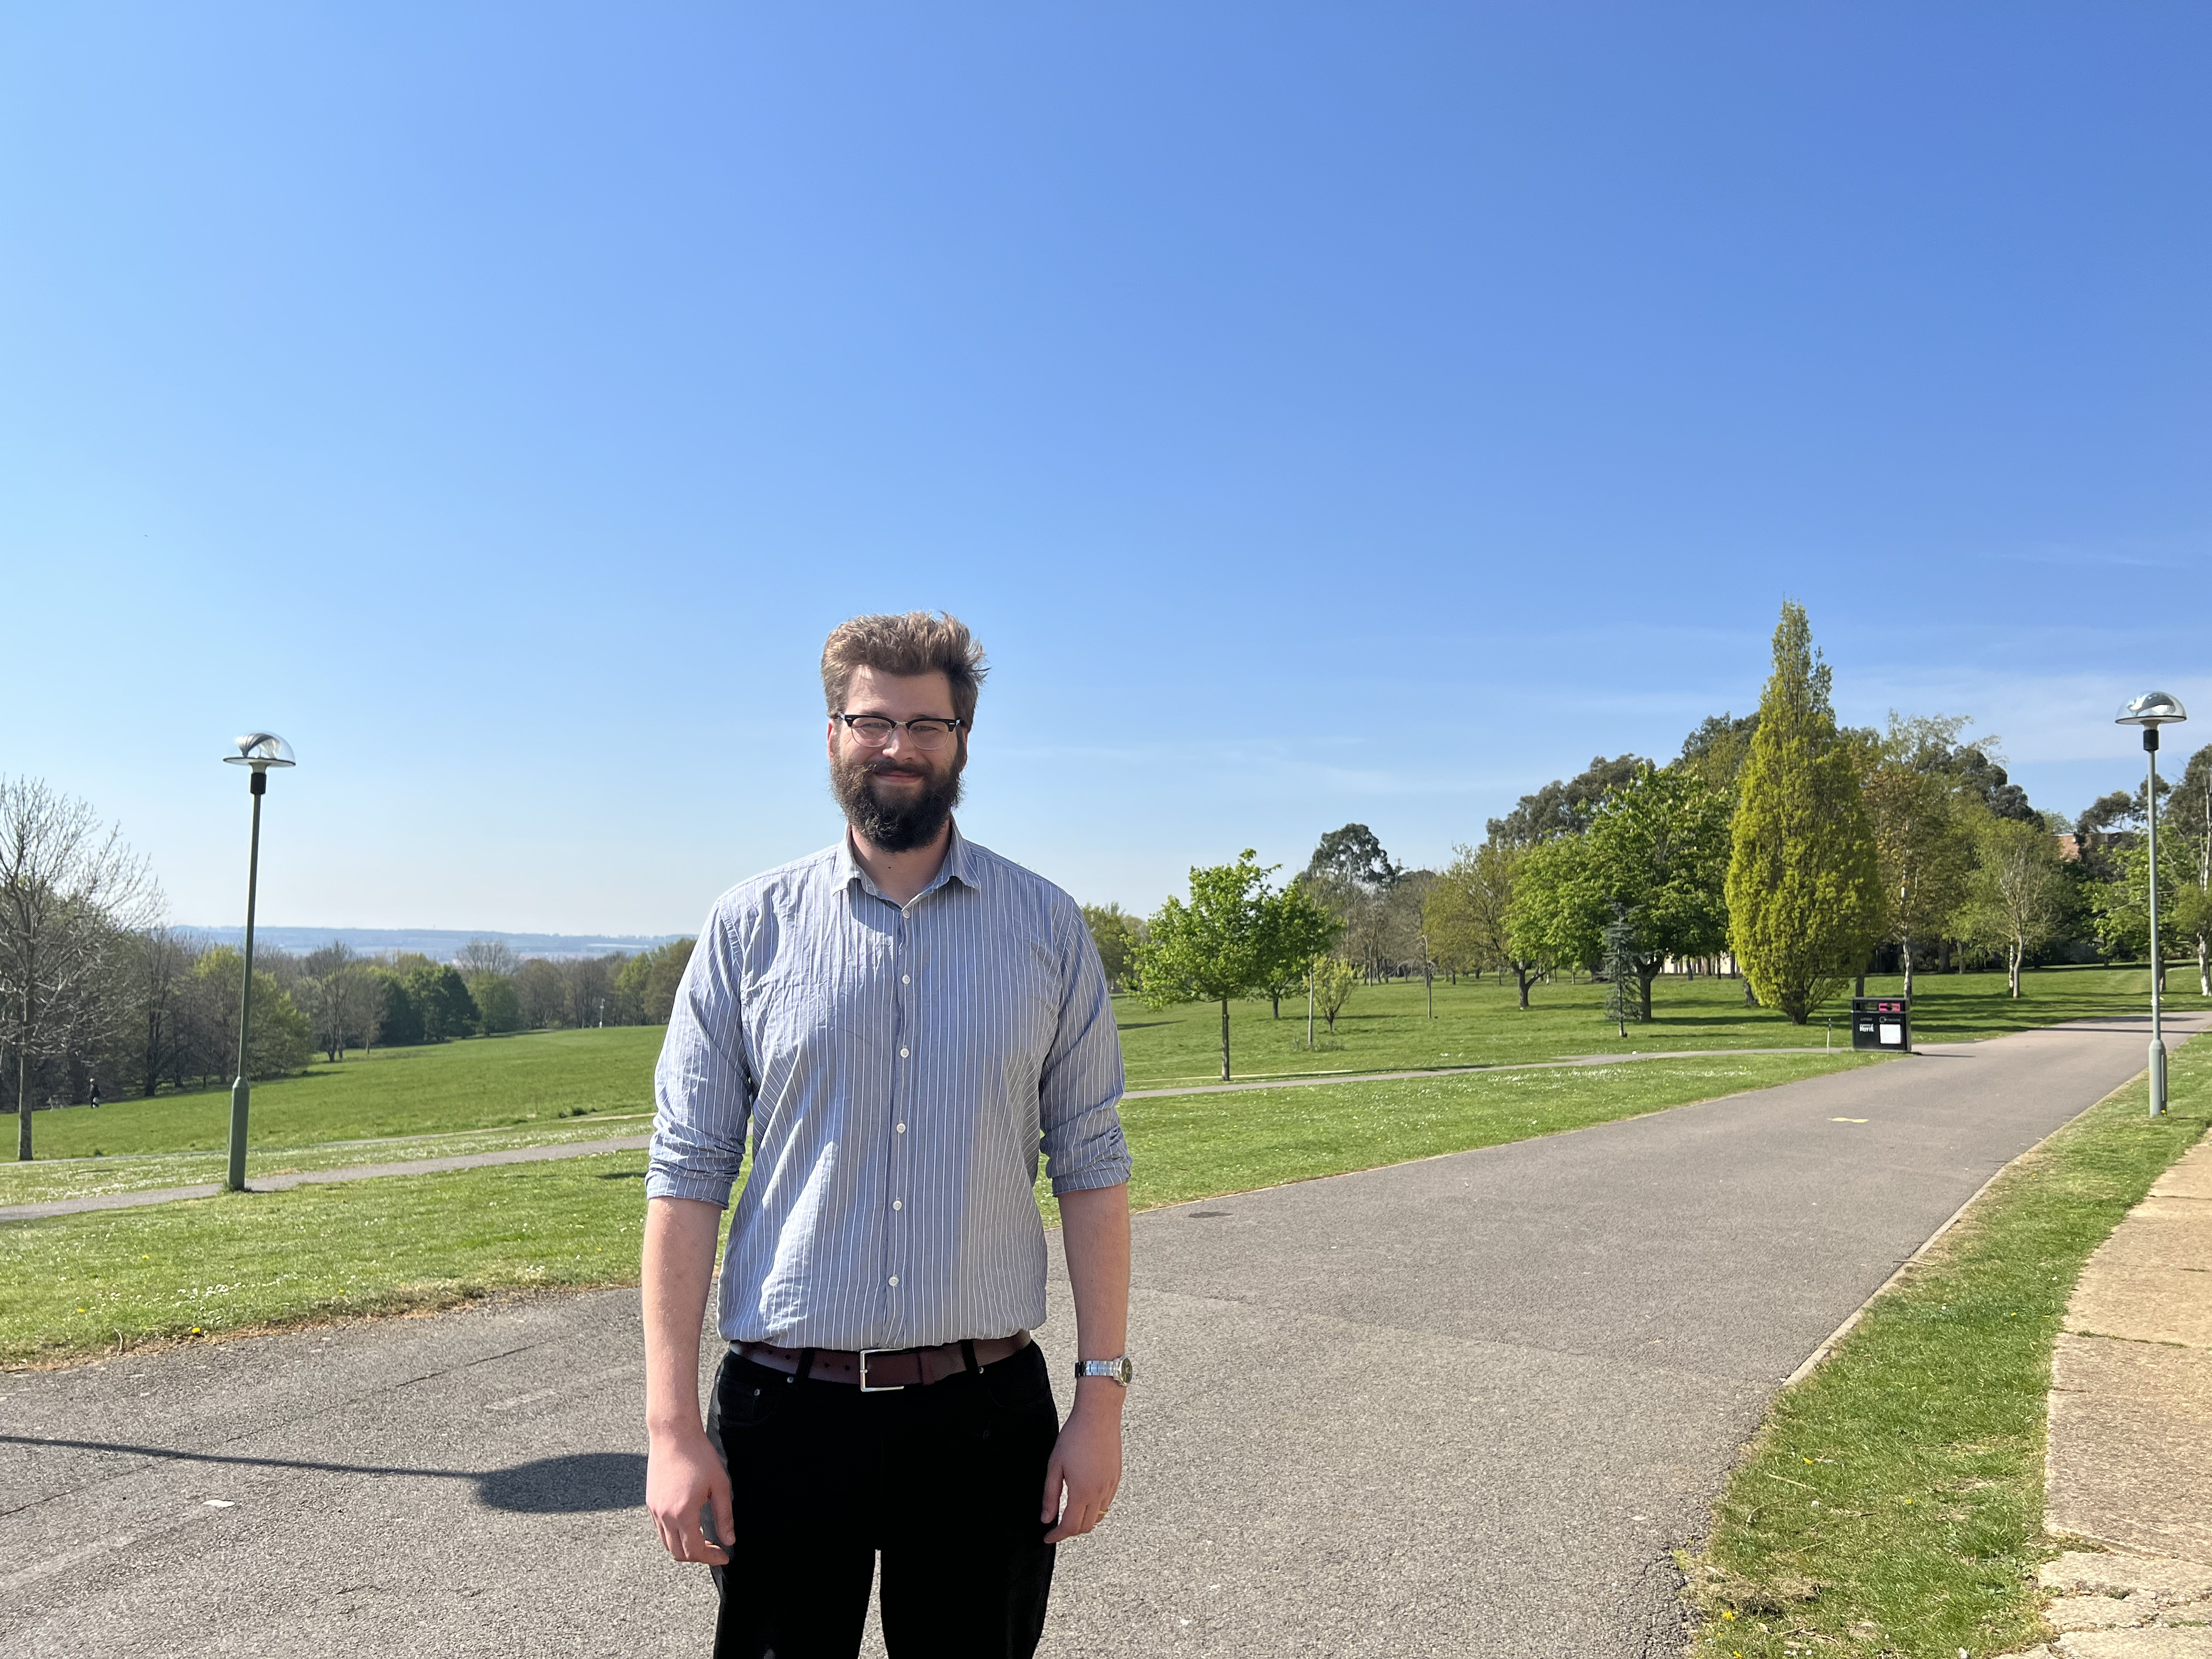 Jon Drewitt outside on the Canterbury campus with grass and trees in the background